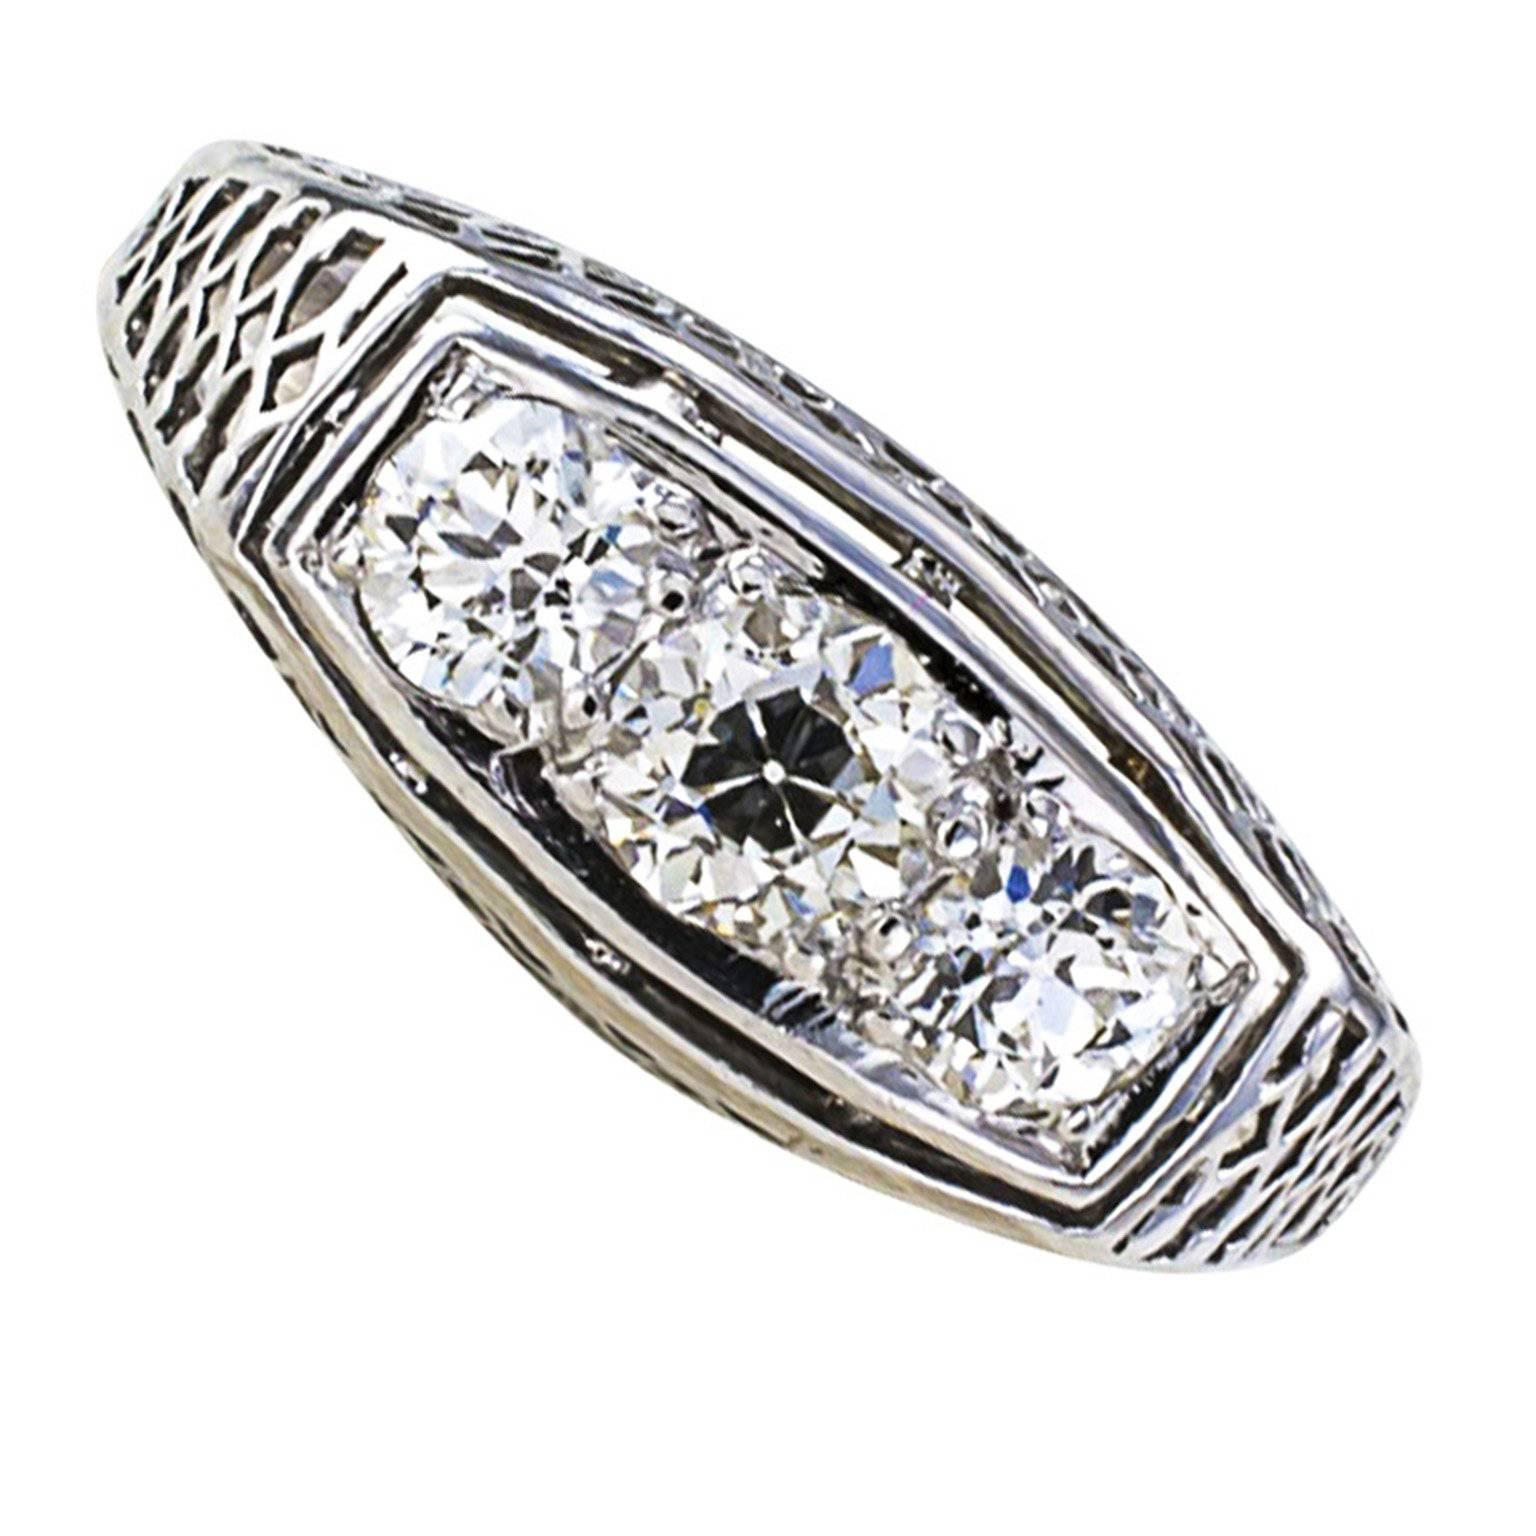 Three-stone Art Deco Filigree Diamond Ring

Nearly three quarters of a carat and exceptional diamond quality for the period, and a very nice three stone design too, simple with eye-tickling pierced work that is both intricate and quite delicate. 